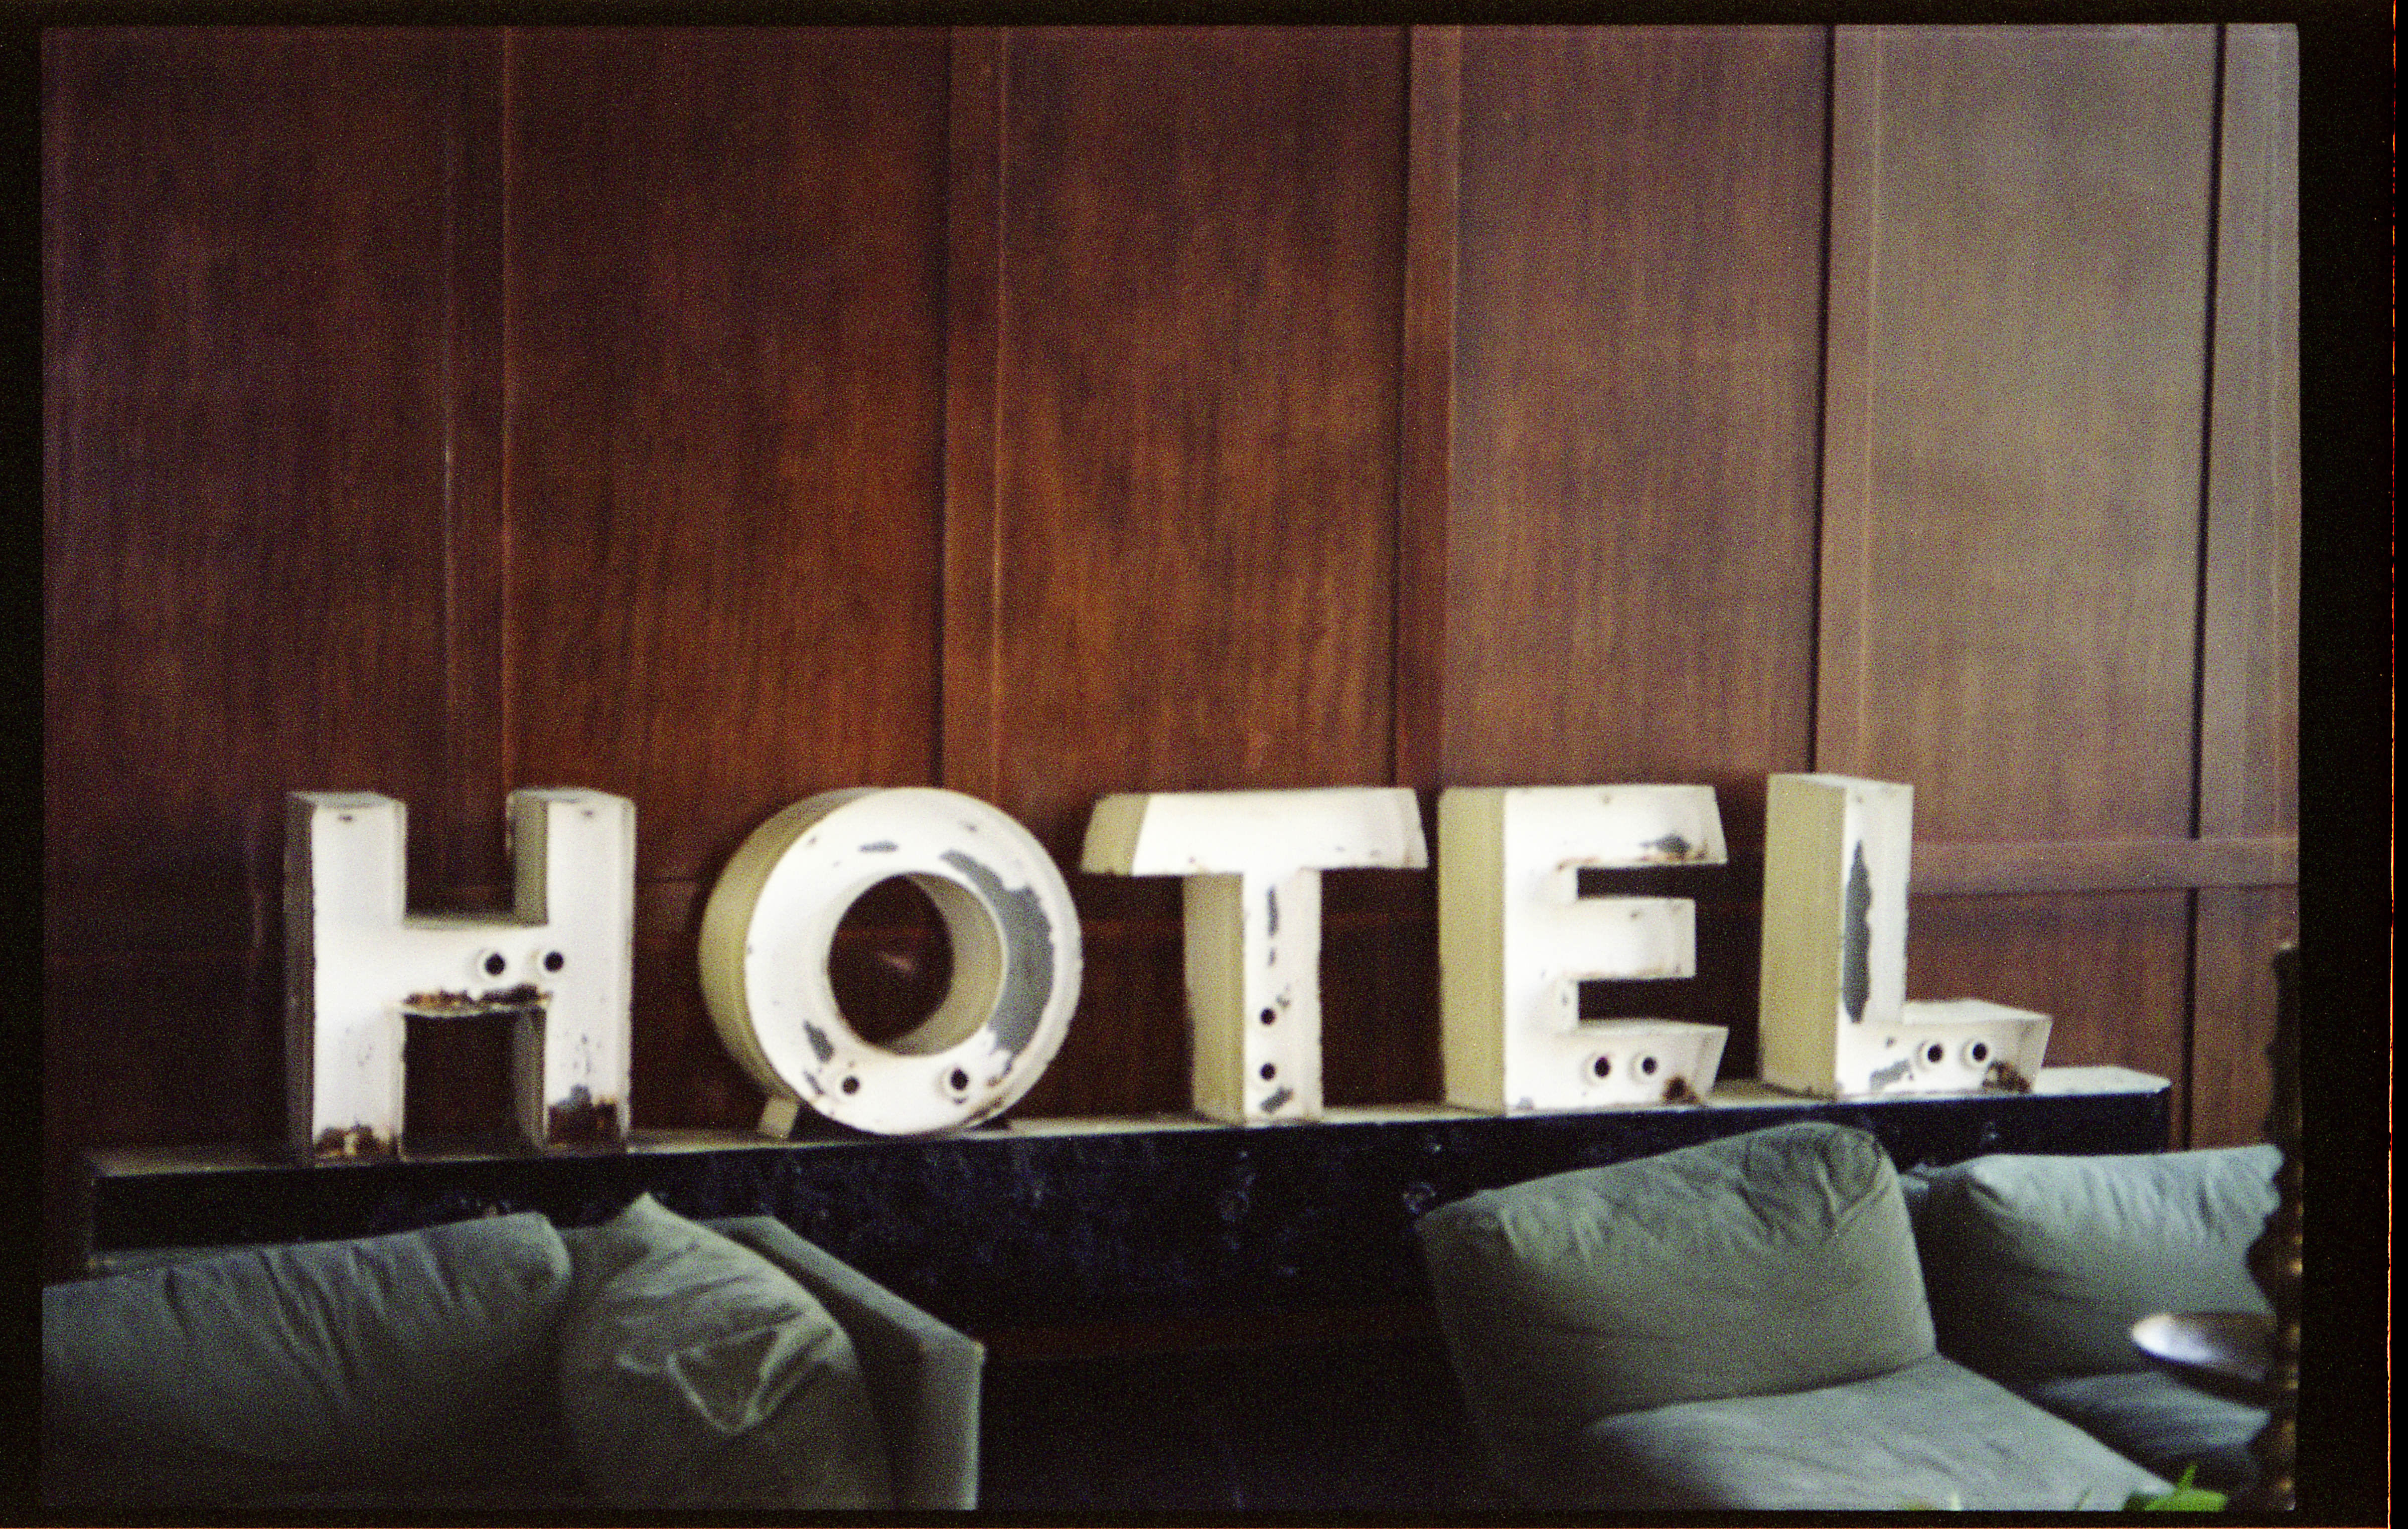 Vintage white 'HOTEL' sign leaning against dark wooden wall in lobby of ACE Hotel in Portland, Oregon.